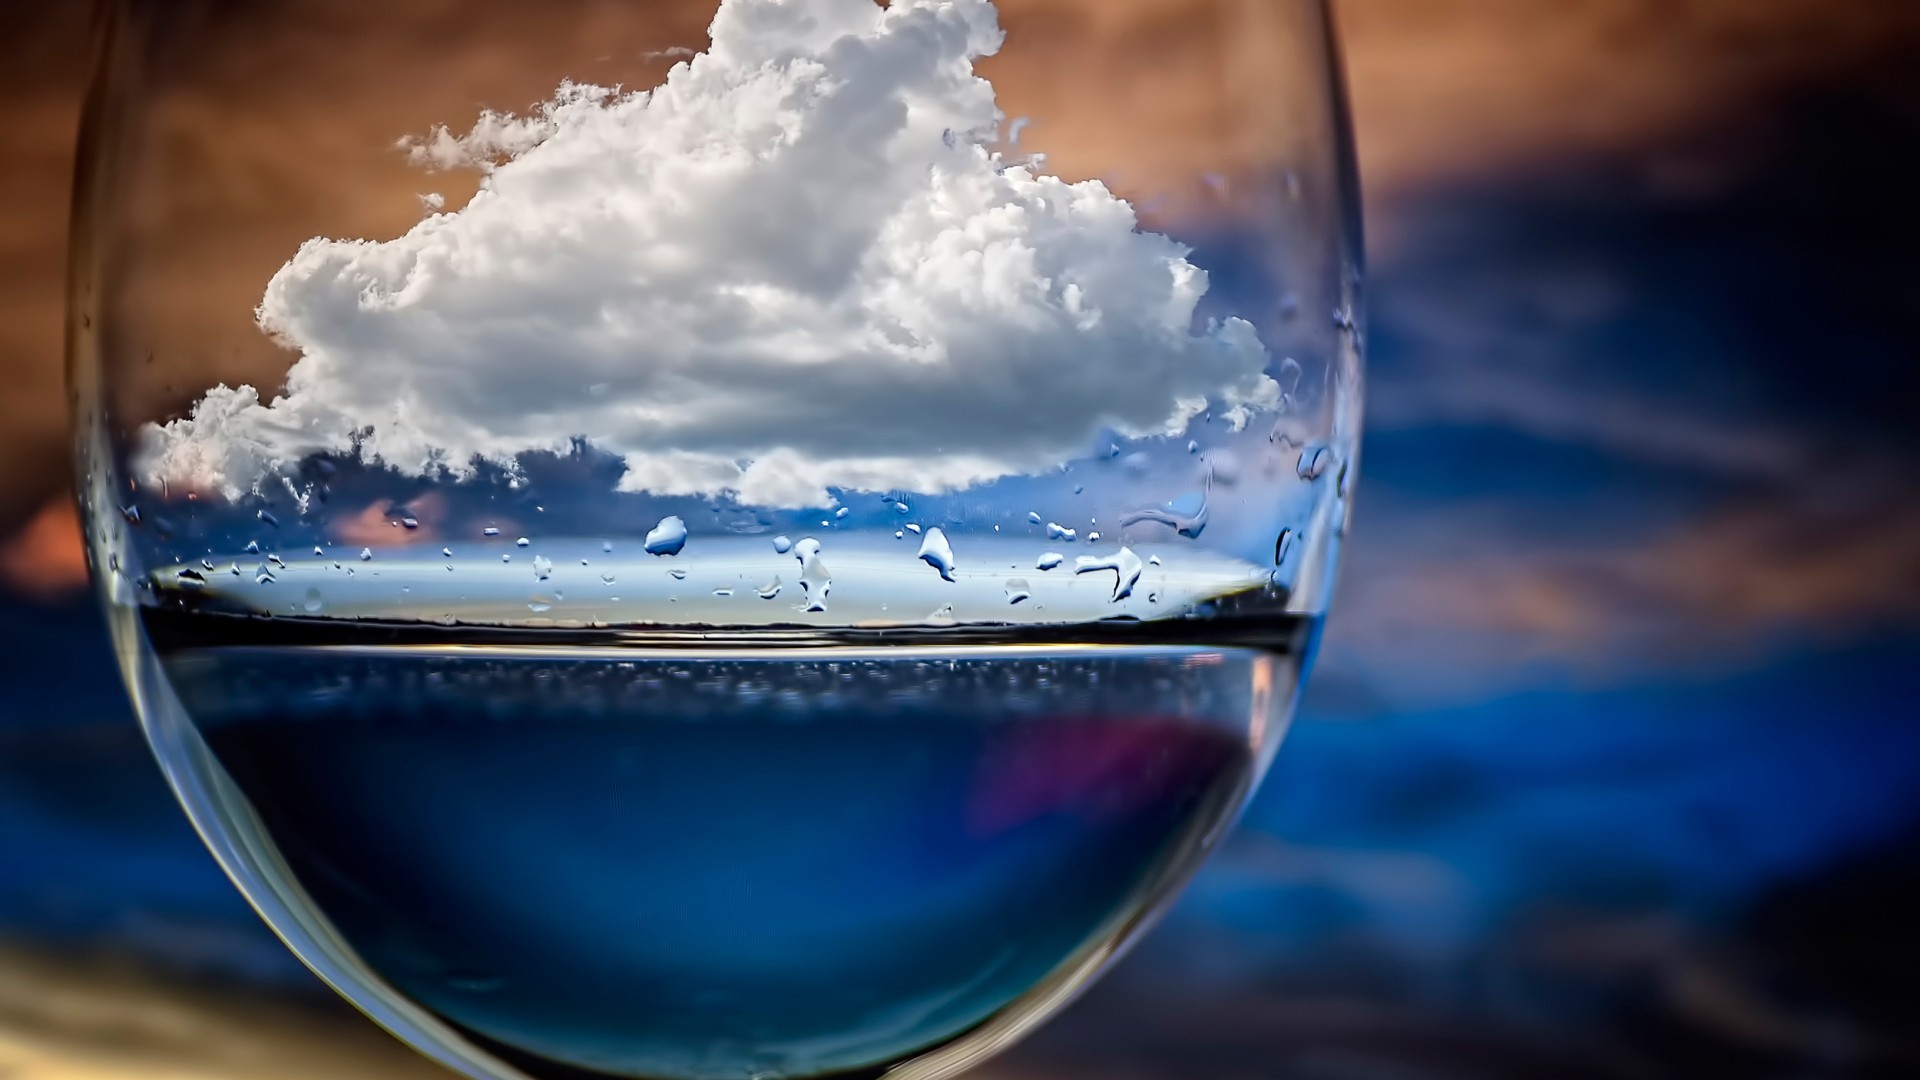 General 1920x1080 nature sky clouds water water drops drinking glass photo manipulation artwork depth of field